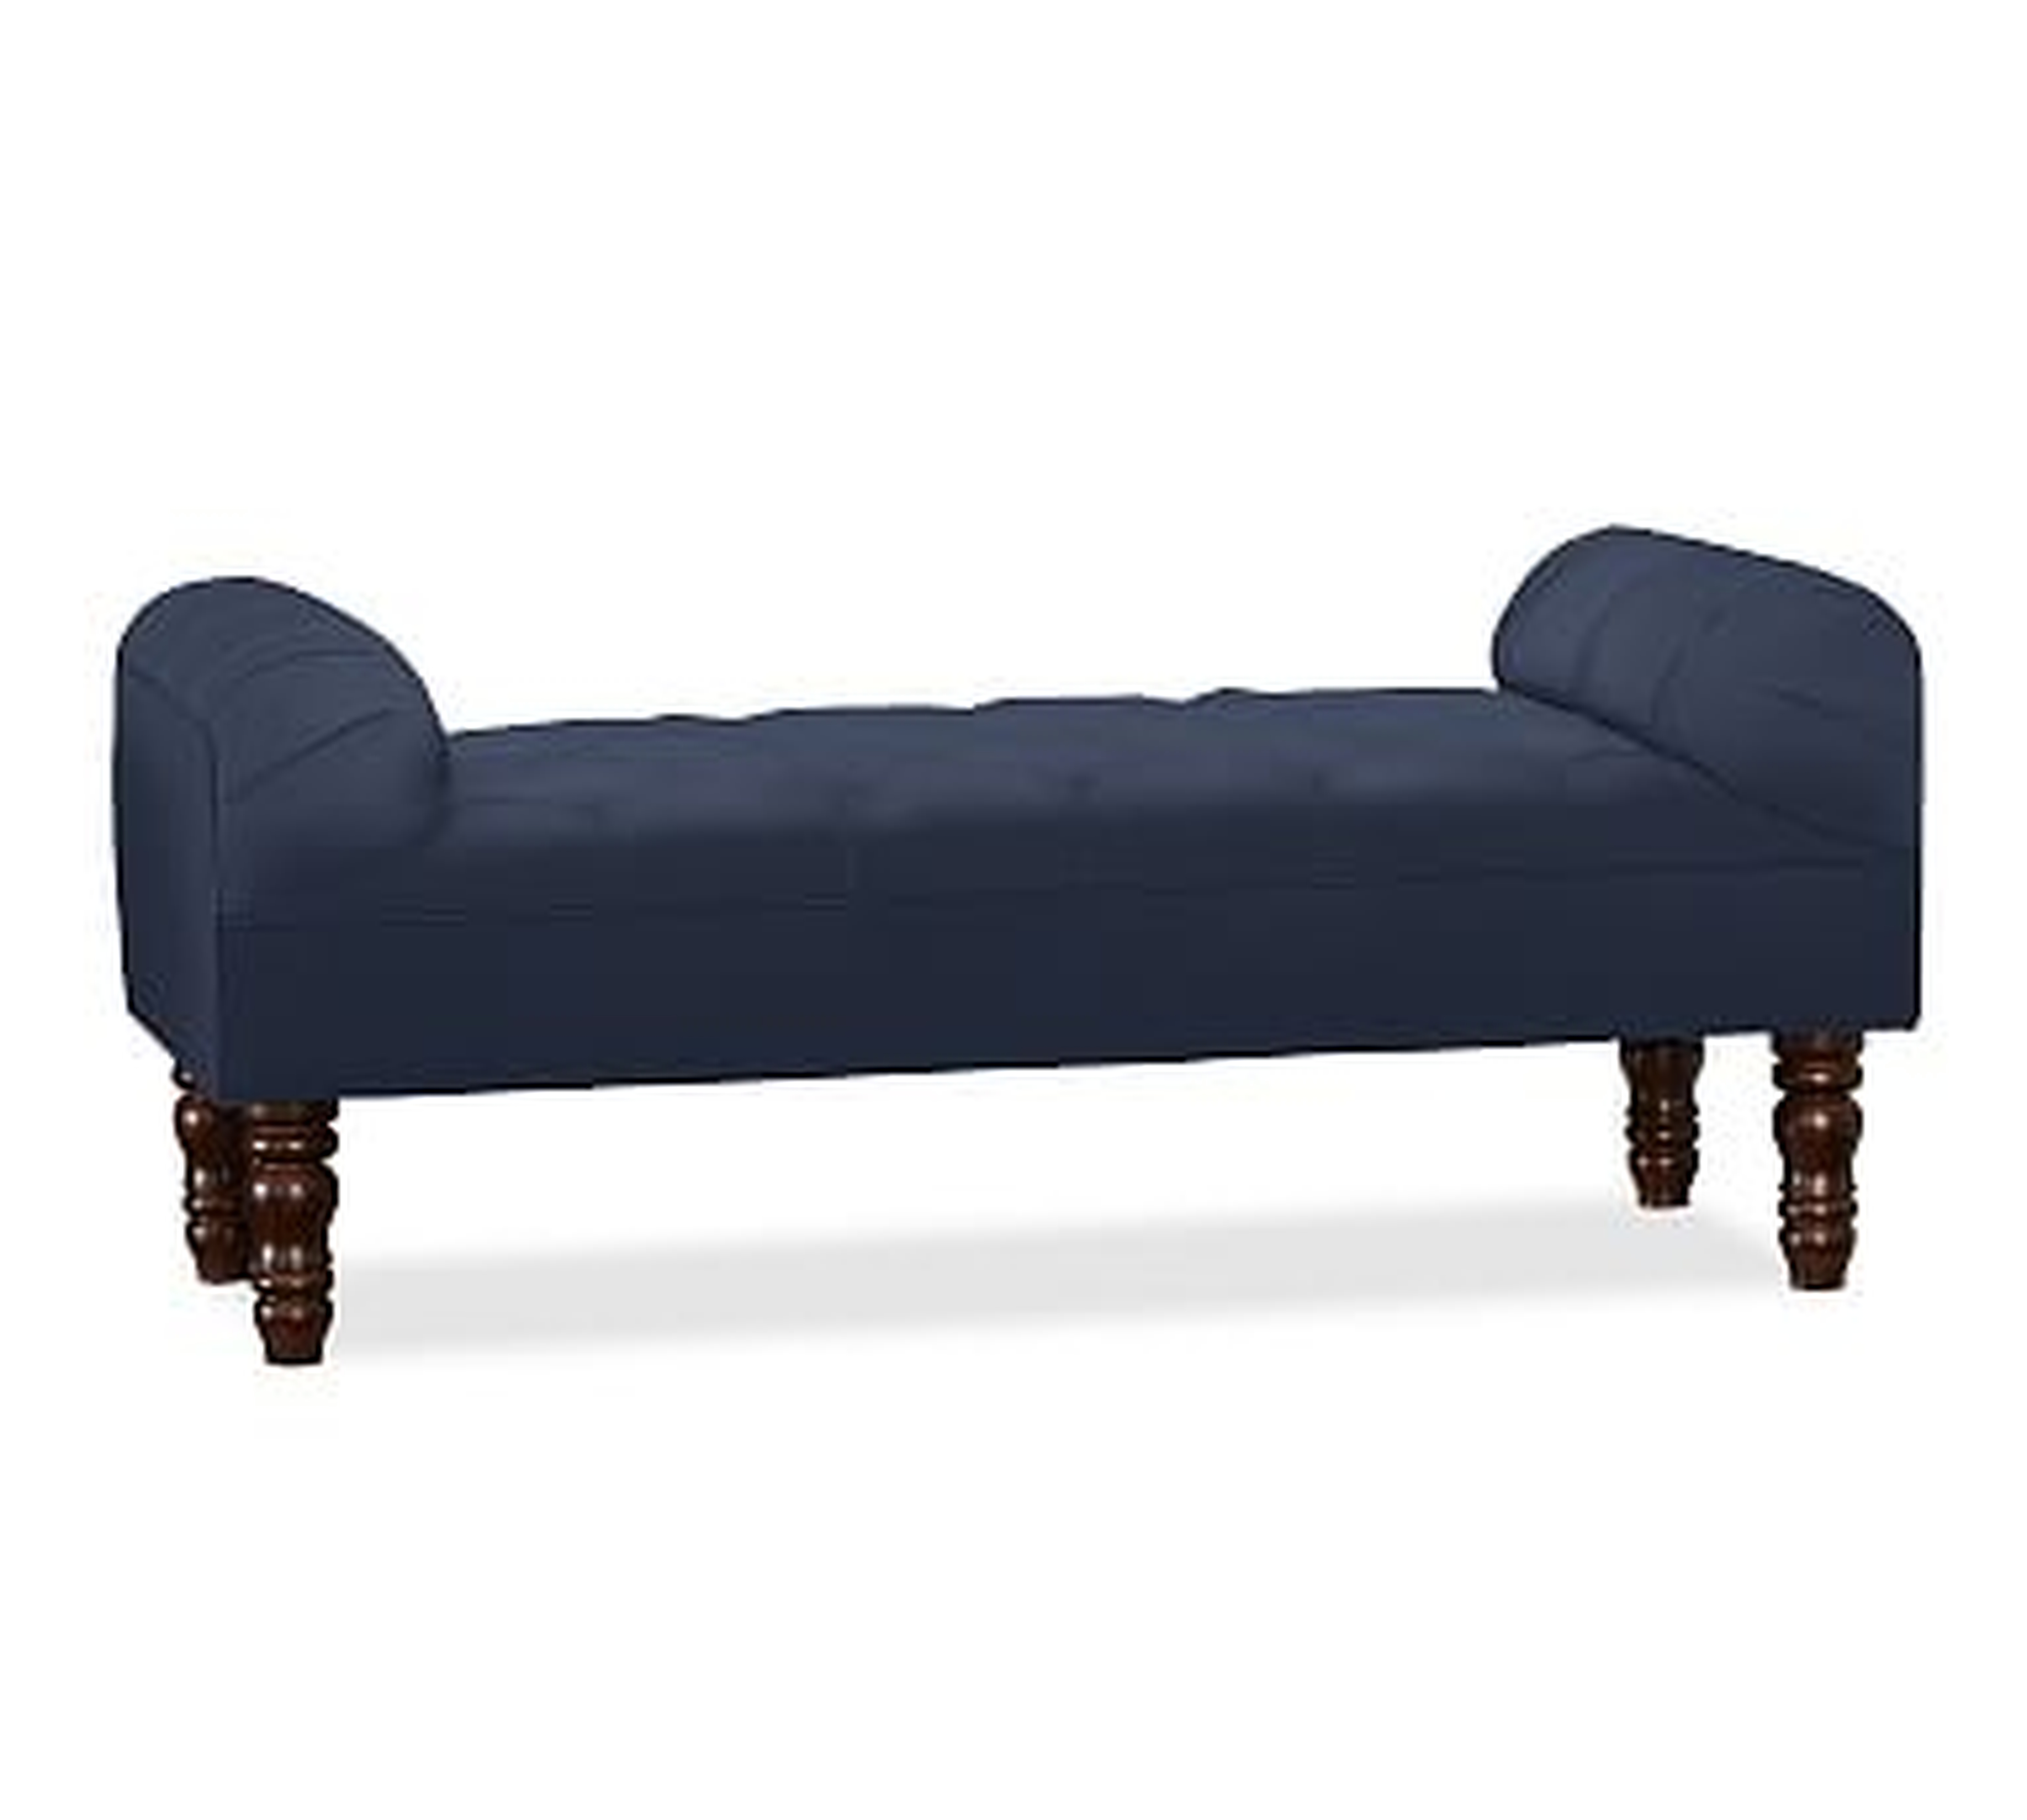 Lorraine Upholstered Tufted Bench, Twill Cadet Navy with Espresso stain - Pottery Barn